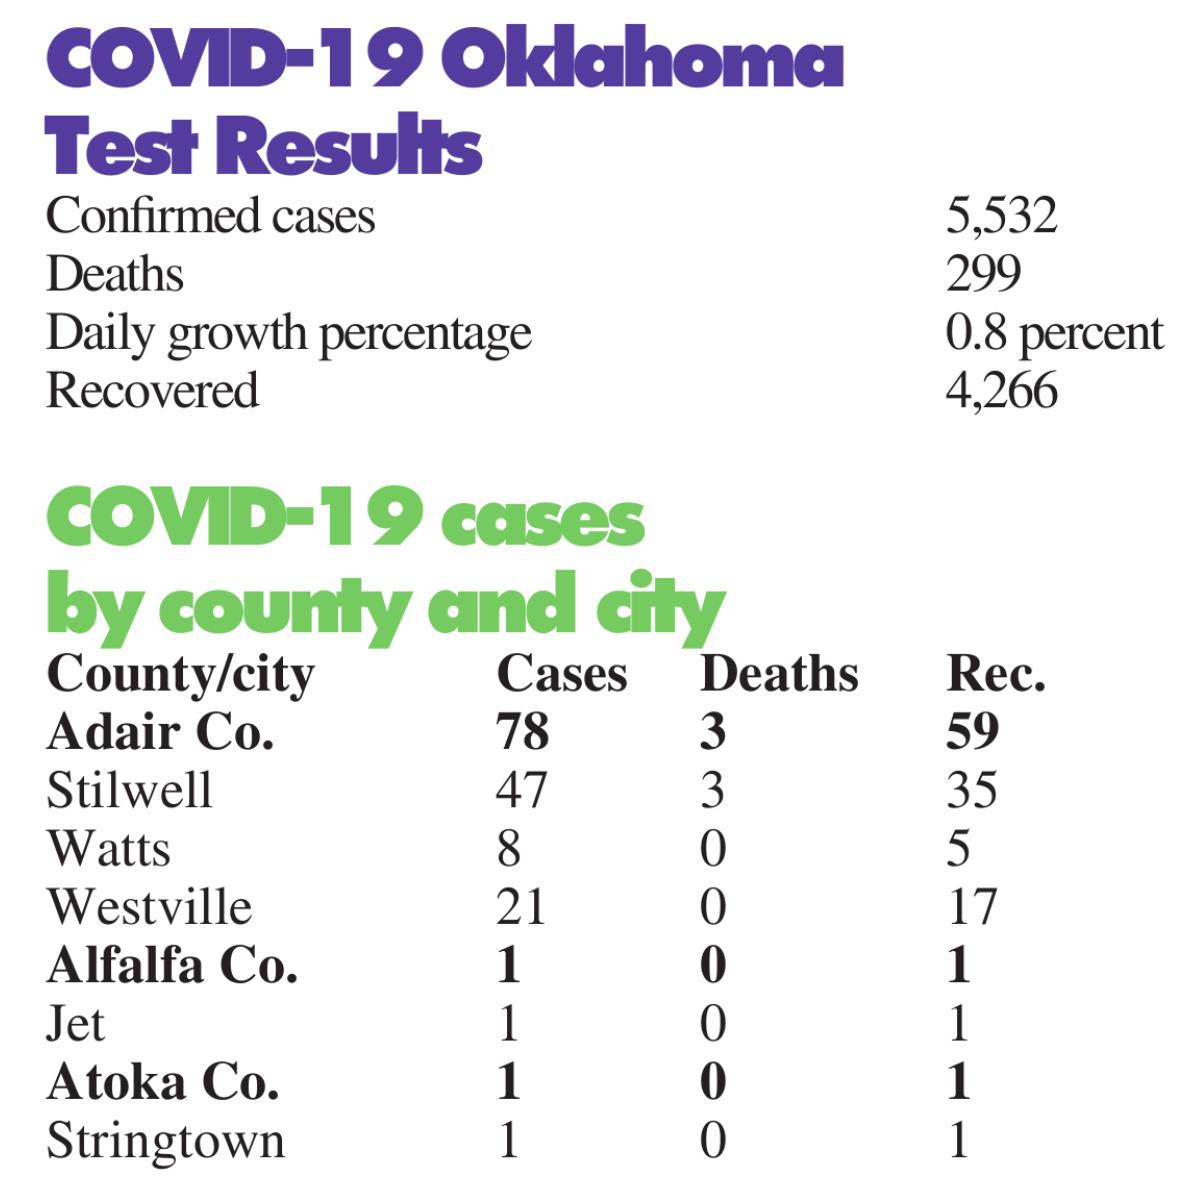 All 11 Custer County cases recovered